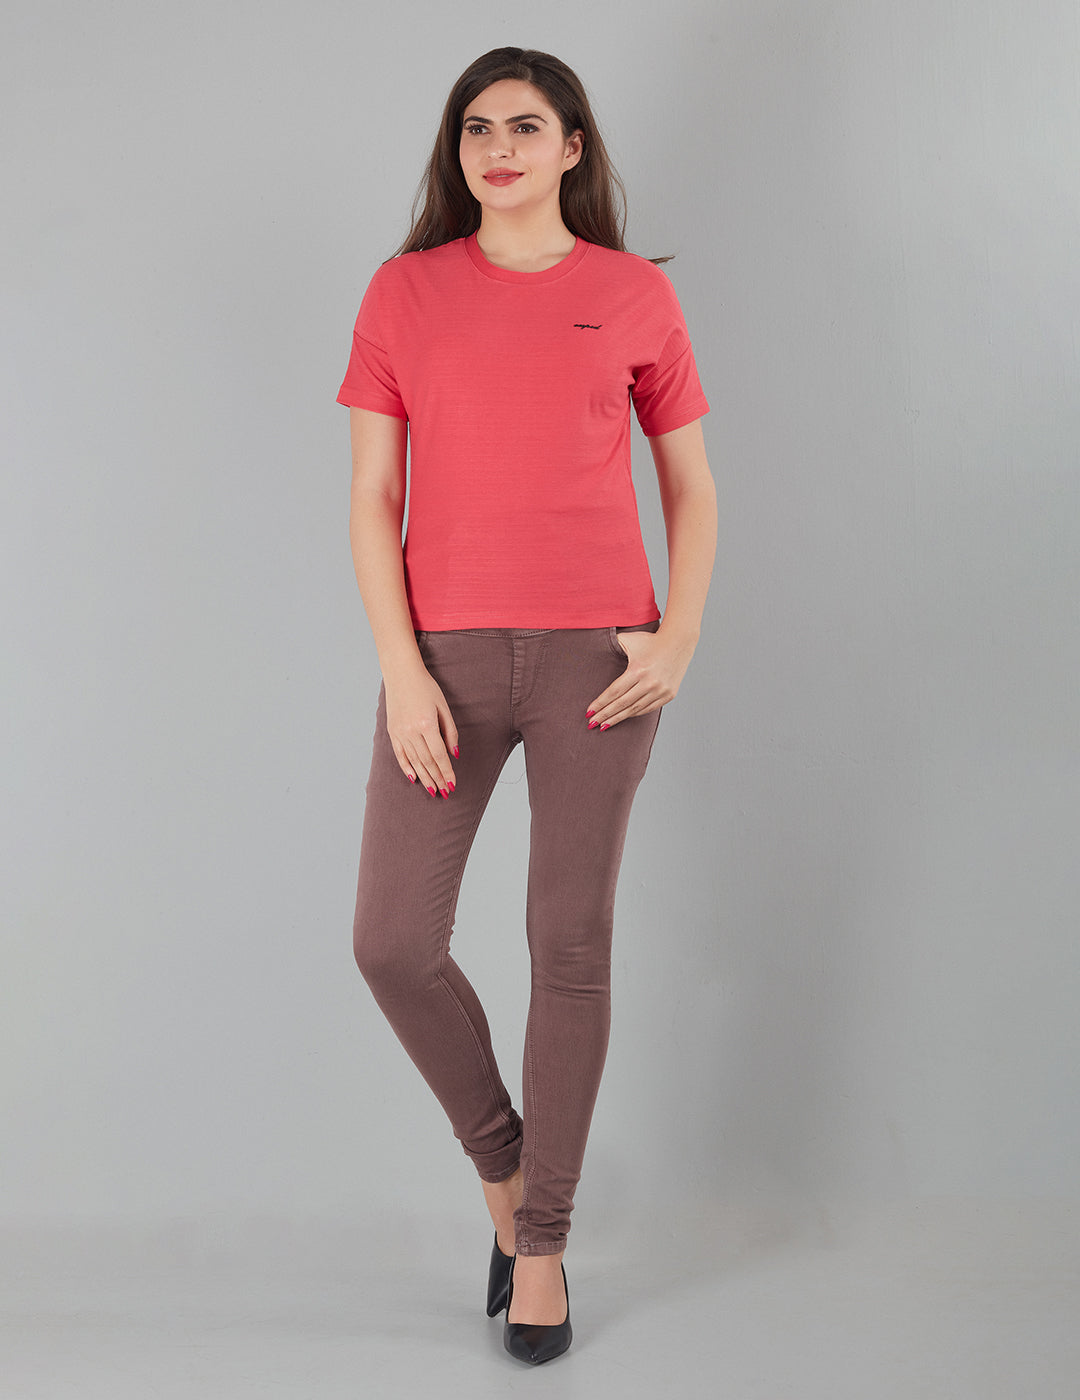 Buy Stylish Tops & Tees Online At Best Price Offers In India